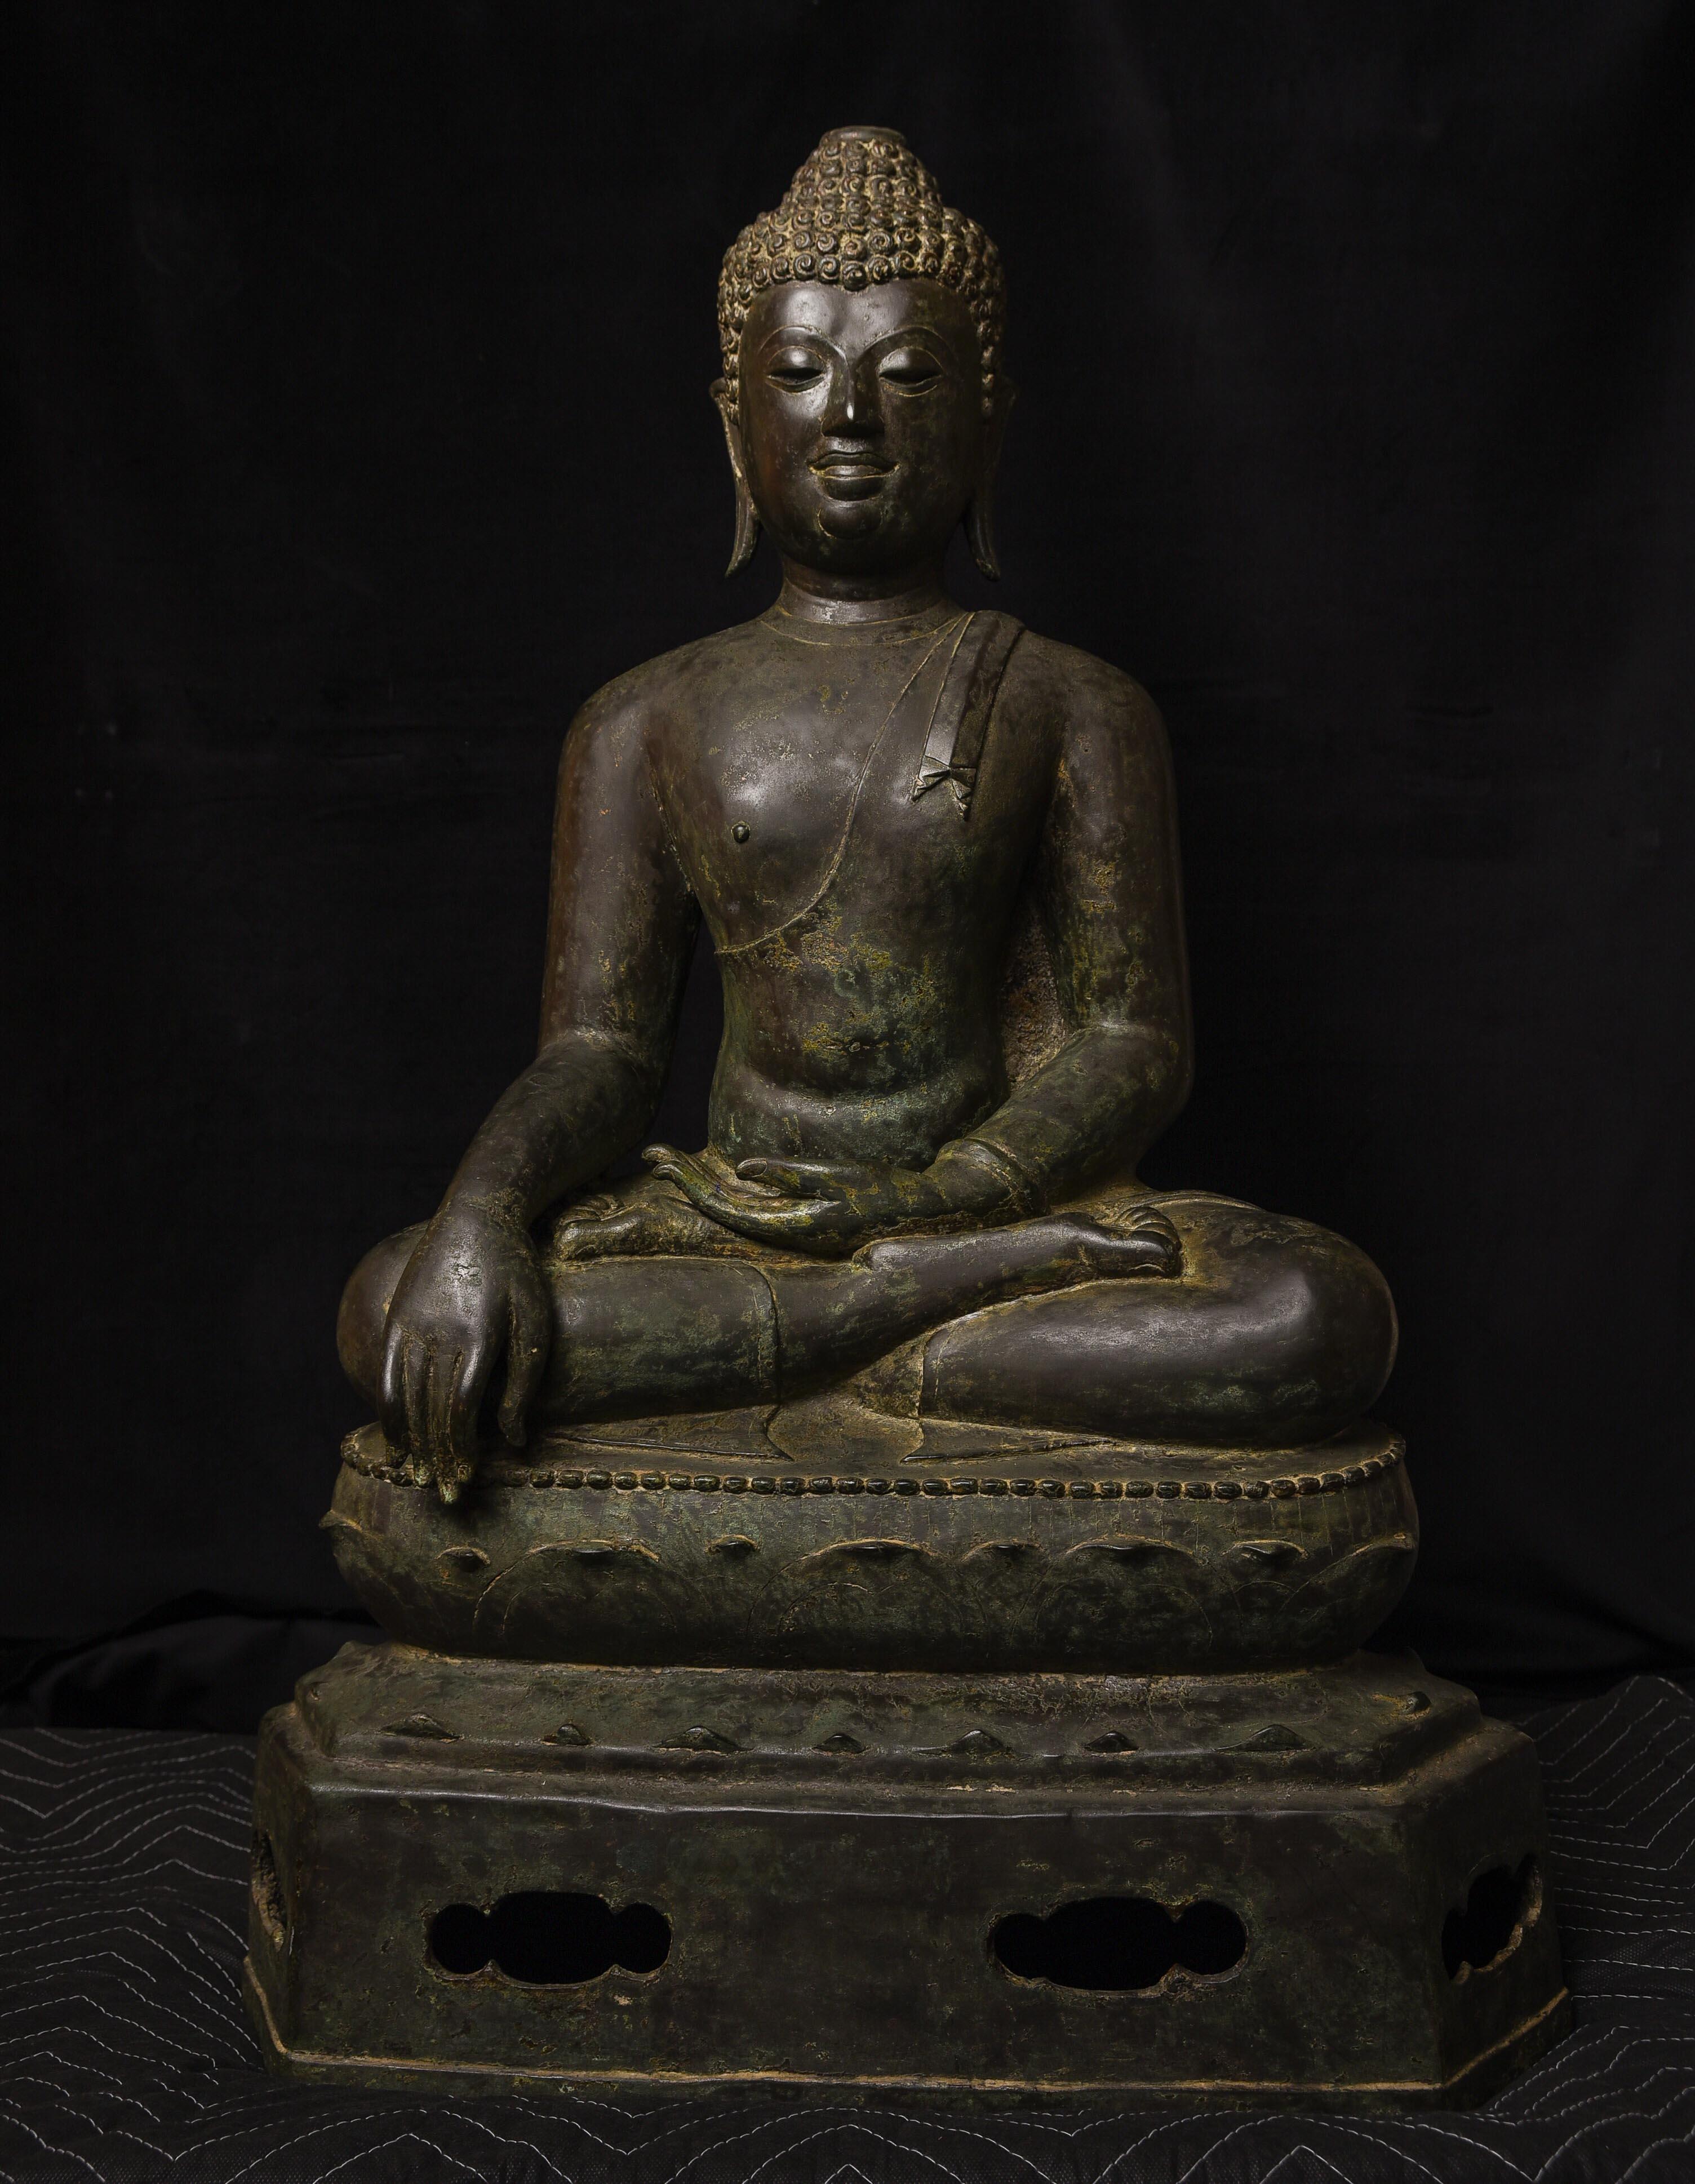 Masterpiece 15th century Northern Thai bronze Buddha. This is the best of the best. Traces of gilding in the crevices of the hair, behind the ears, etcetera. The casting is crisp, the sculpting shows great finesse and depth, the patina is beautiful